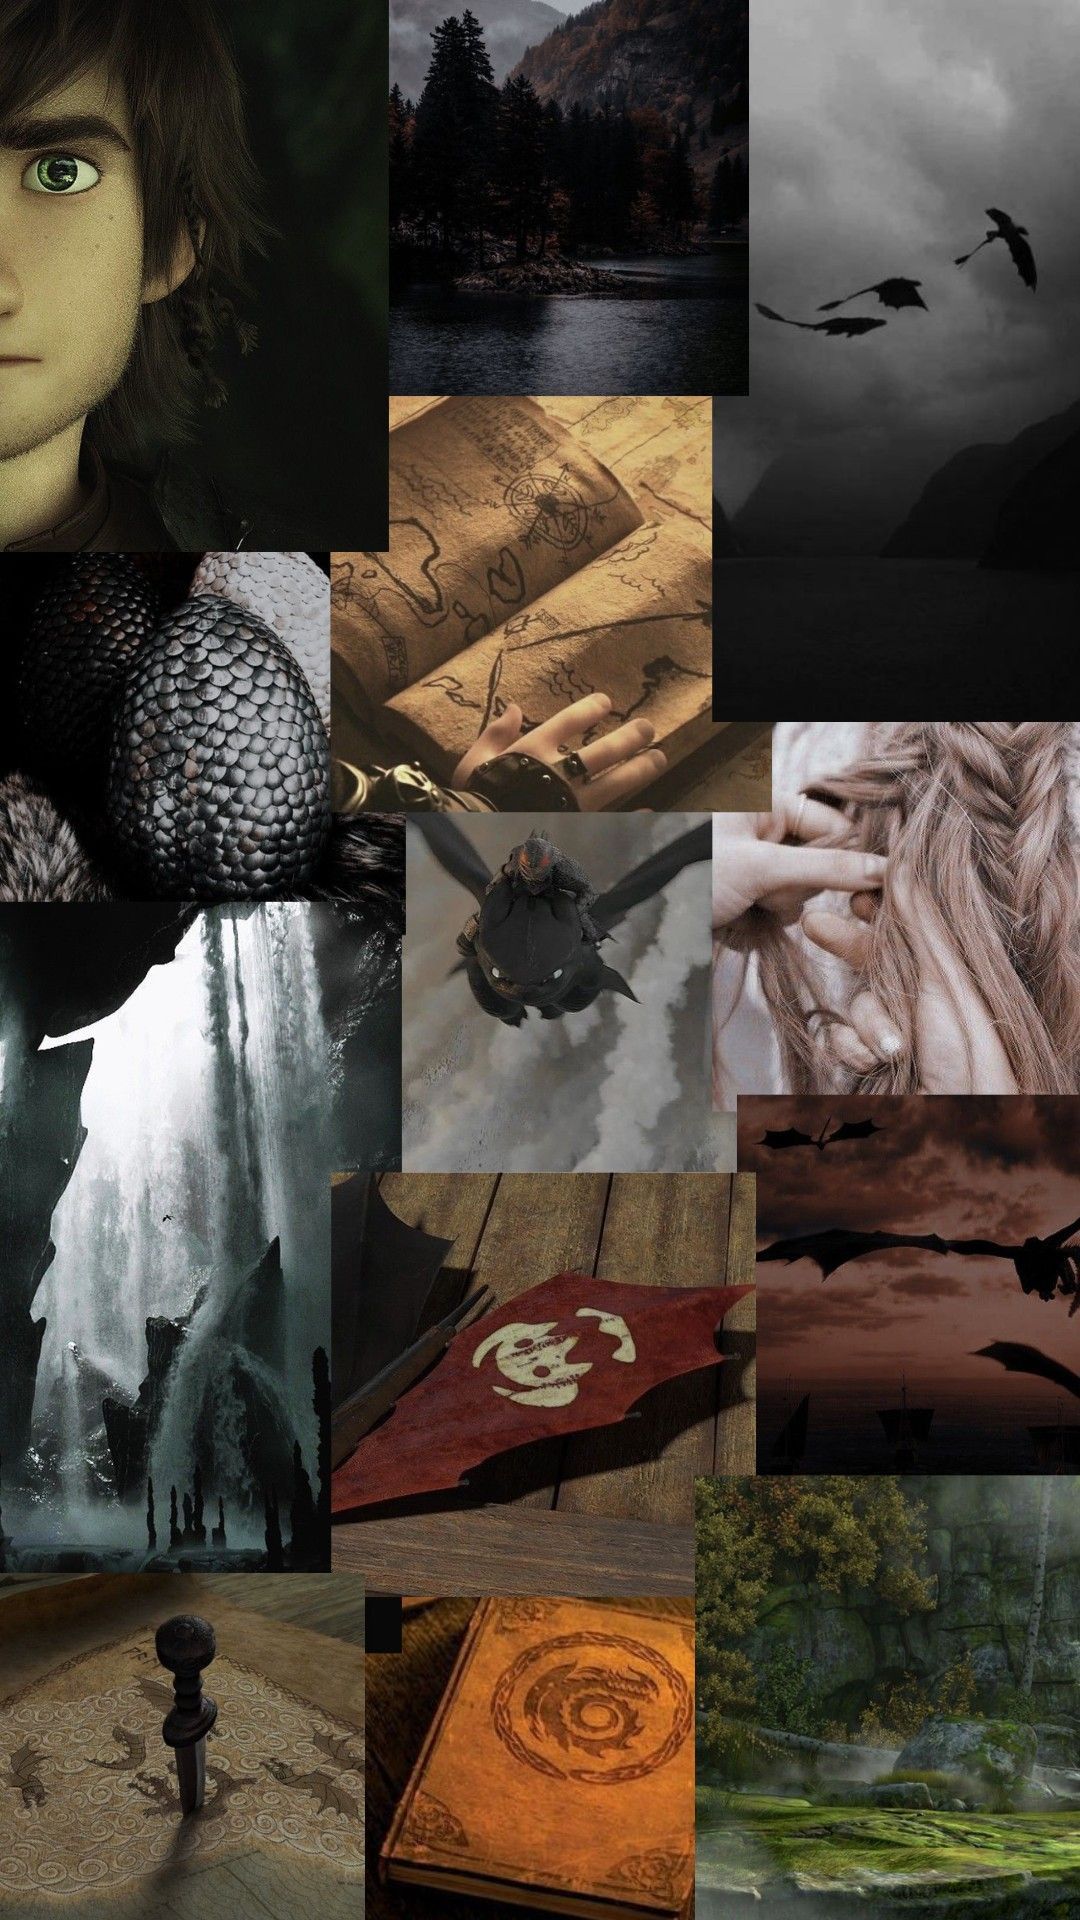 A collage of images from the book series A Court of Thorns and Roses - How to Train Your Dragon